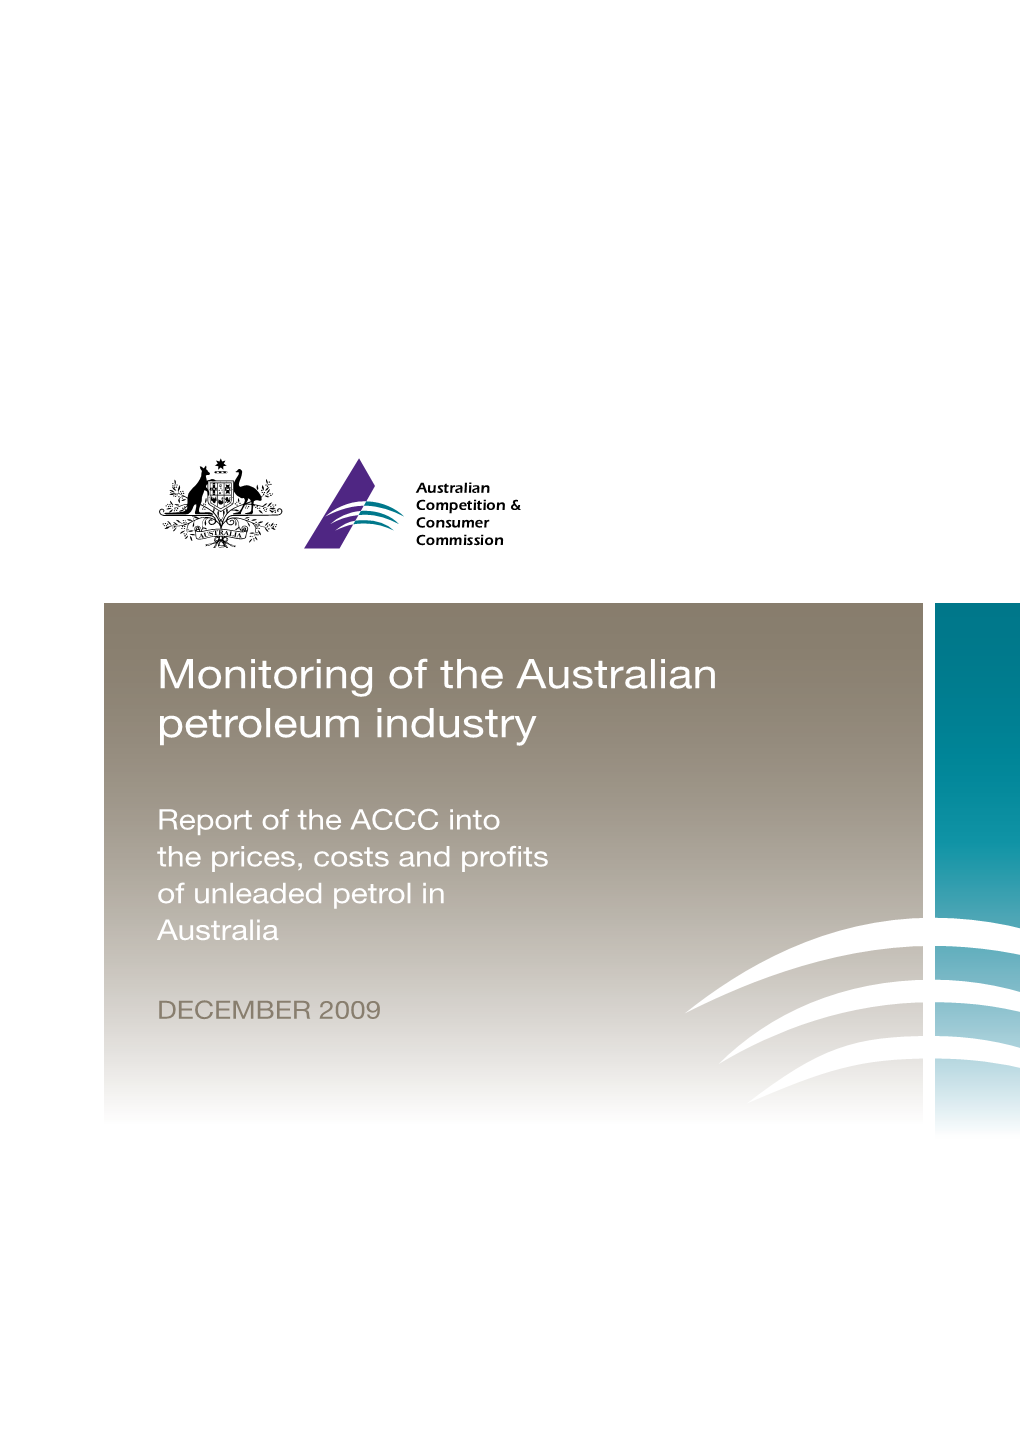 Monitoring of the Australian Petroleum Industry